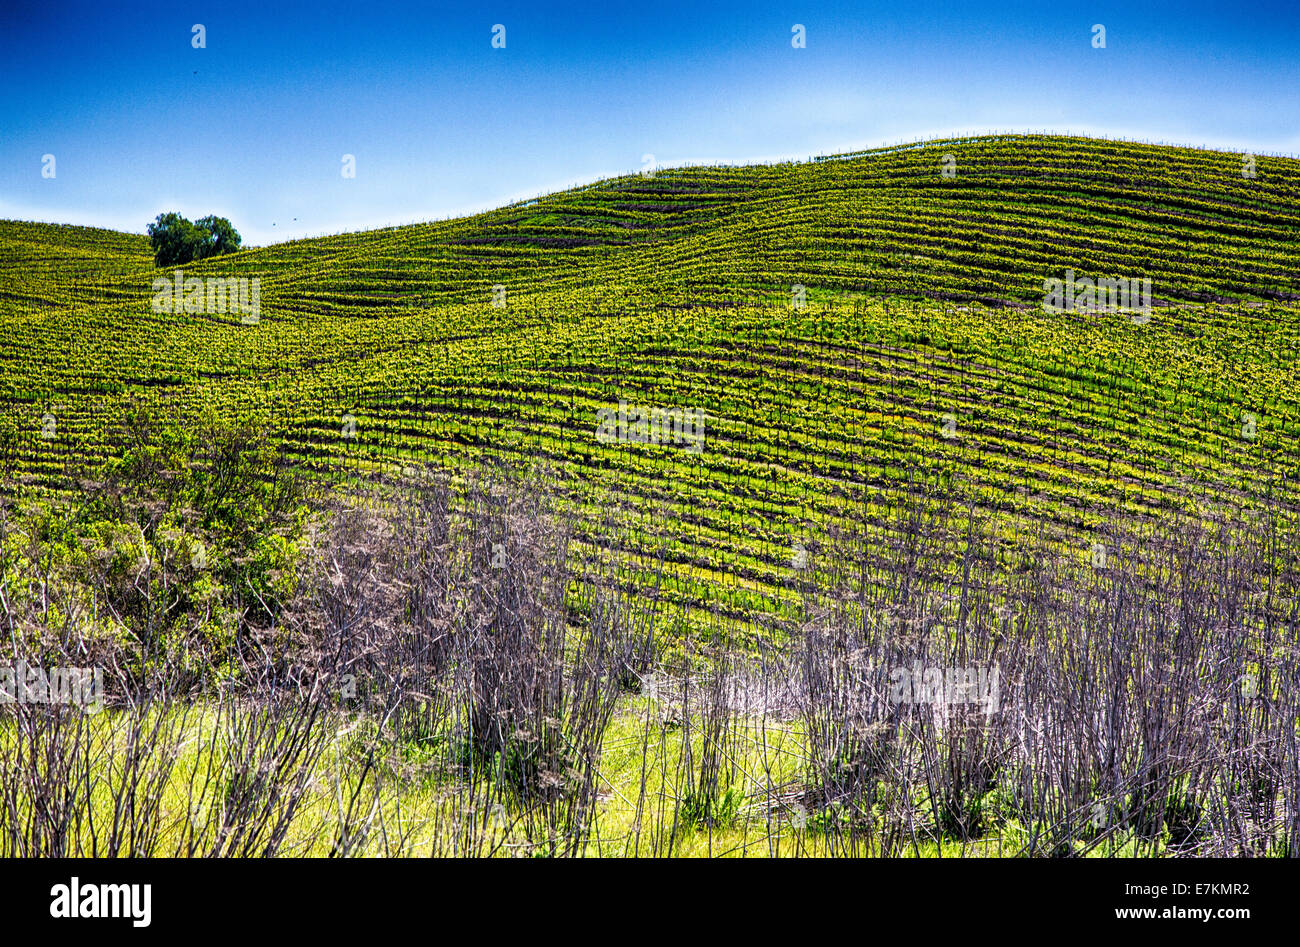 Rolling hills covered with row upon row of grape vines in the cultivated vineyards of California wine country. Stock Photo